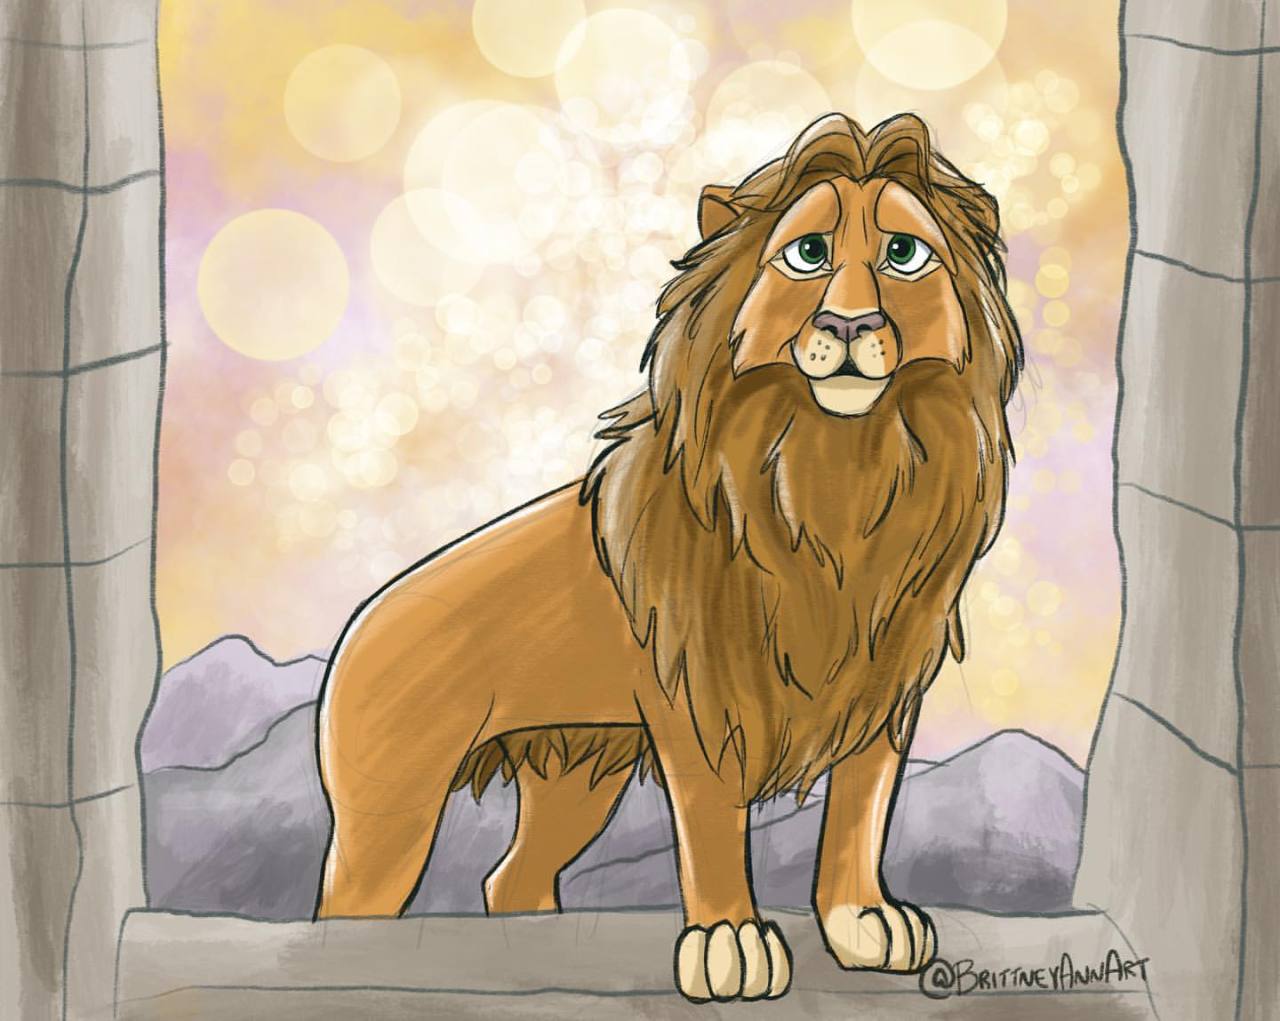 Aslan from The Chronicles of Narnia